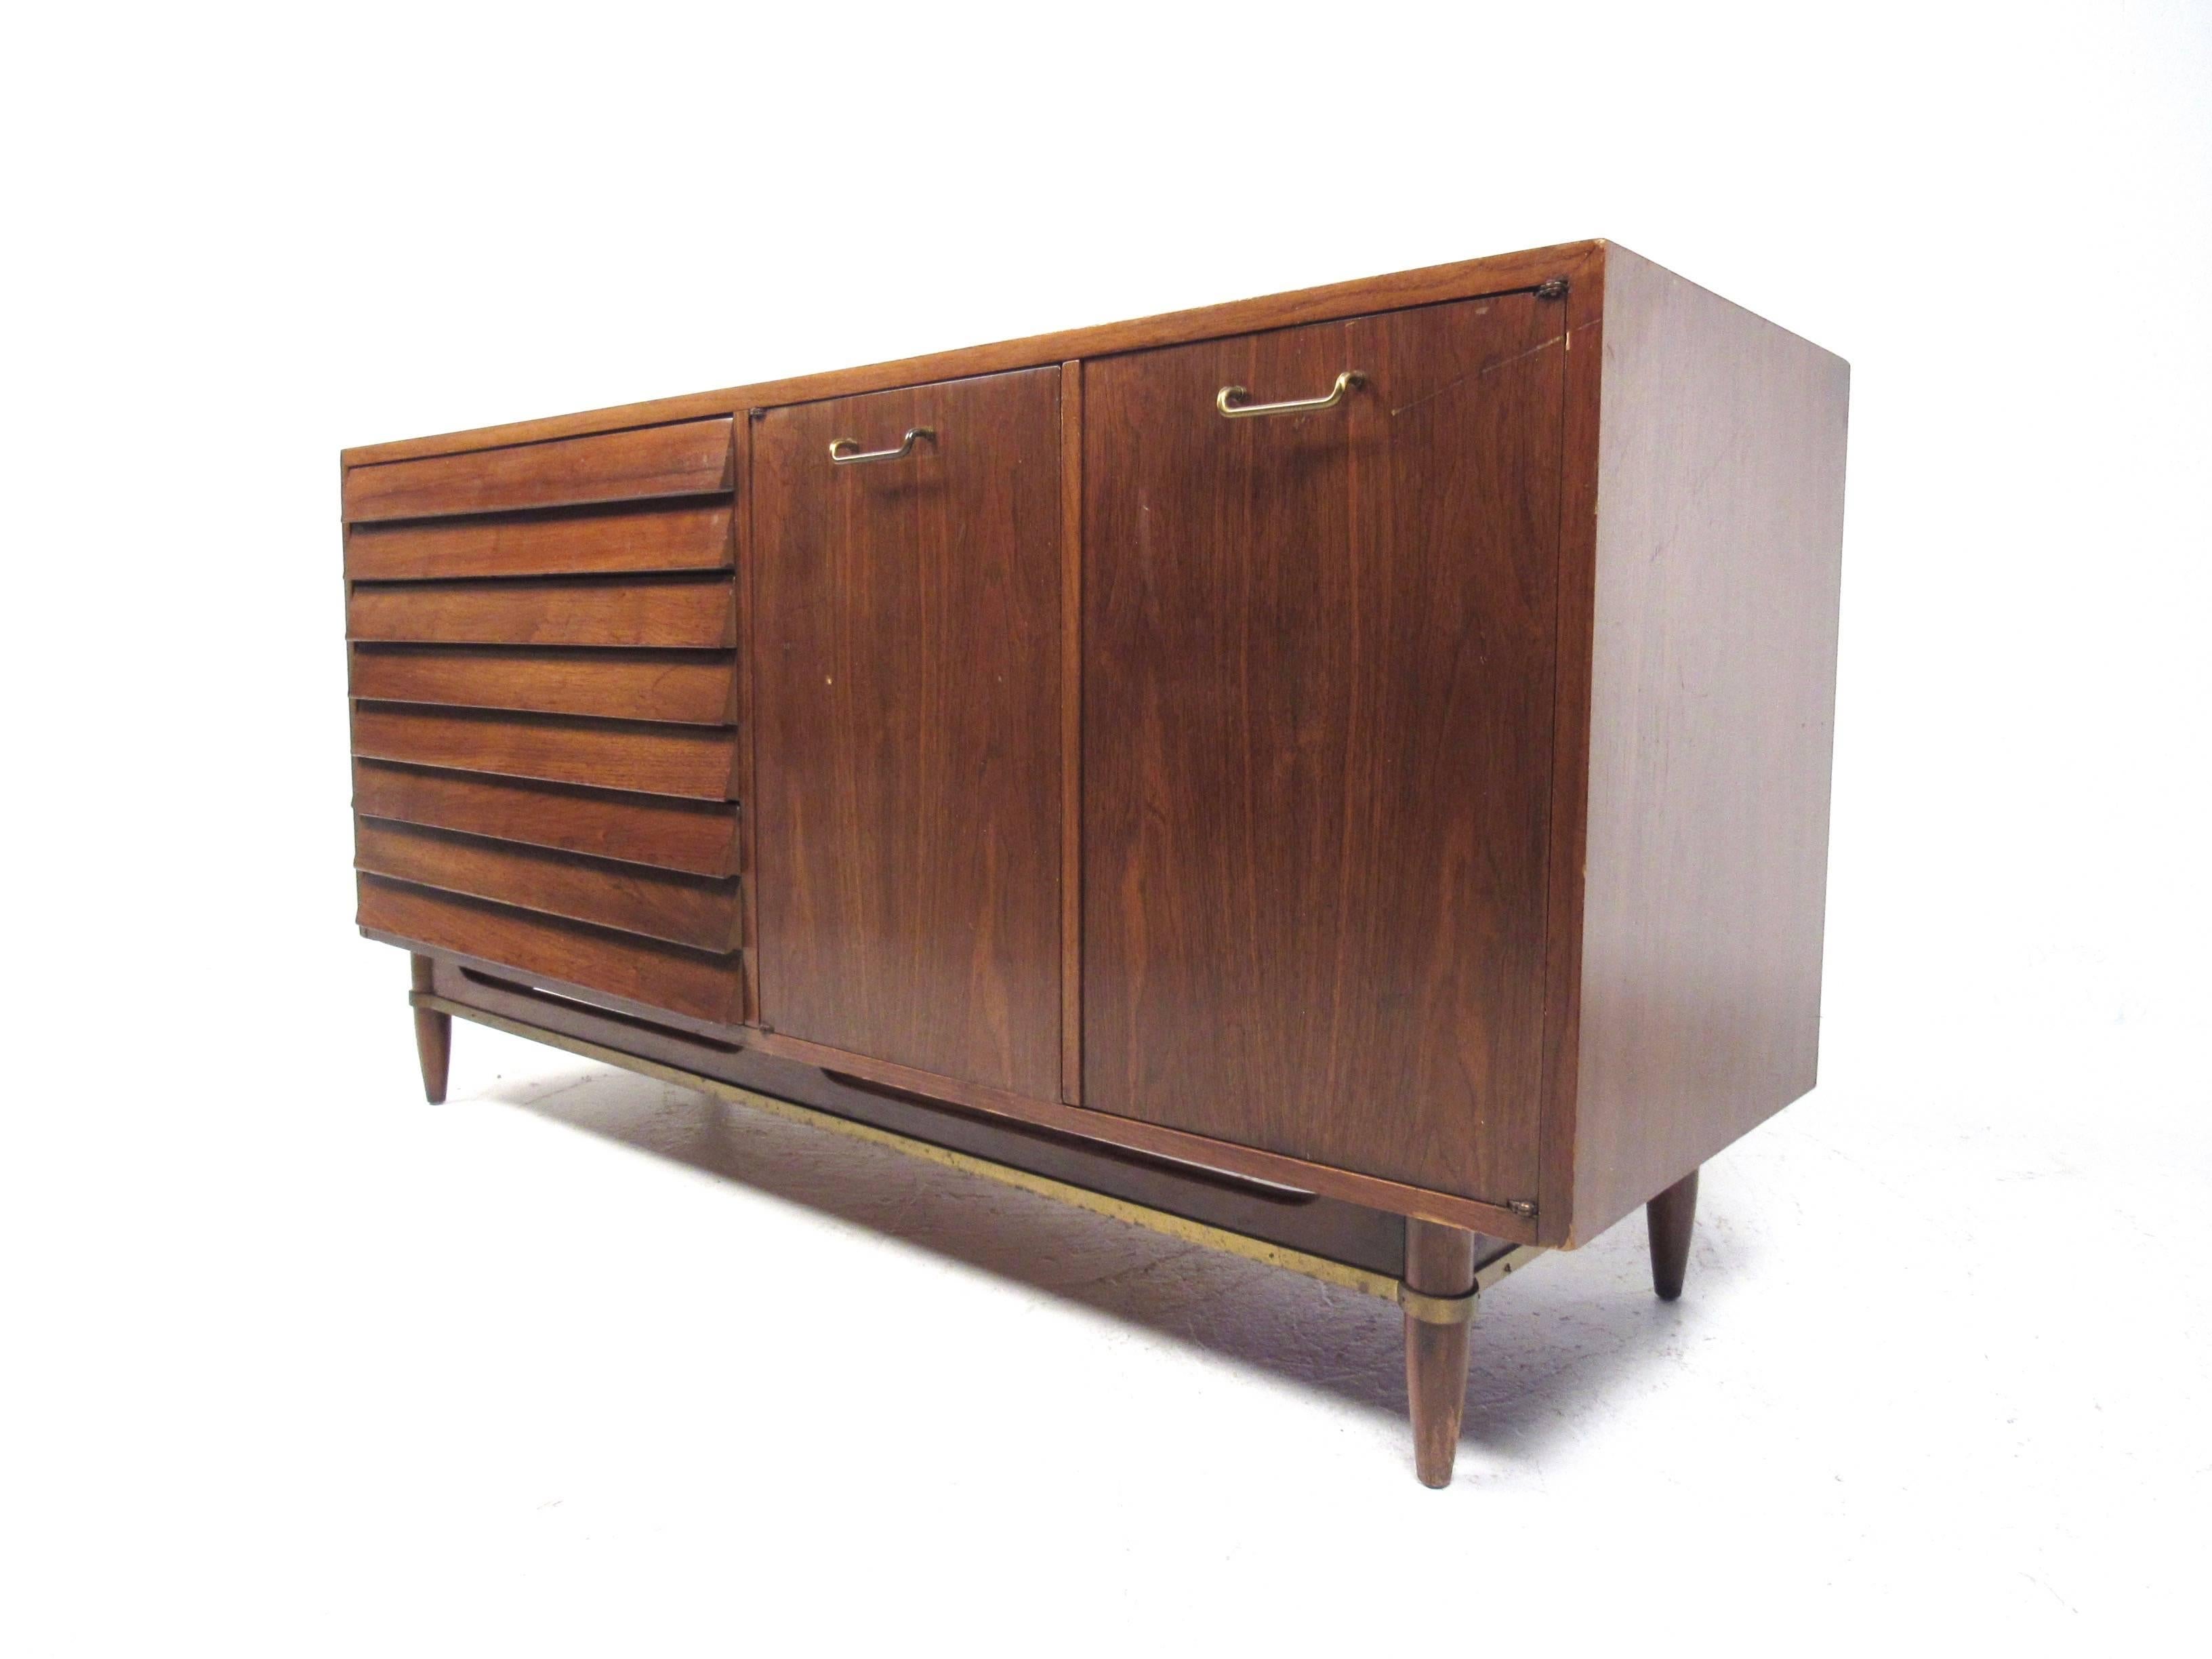 This beautiful vintage credenza features a unique walnut finish with louvered front drawers. Brass trim adds to the Mid-Century appeal of this miniature American of Martinsville storage piece, perfect size for smaller apartments with plenty of